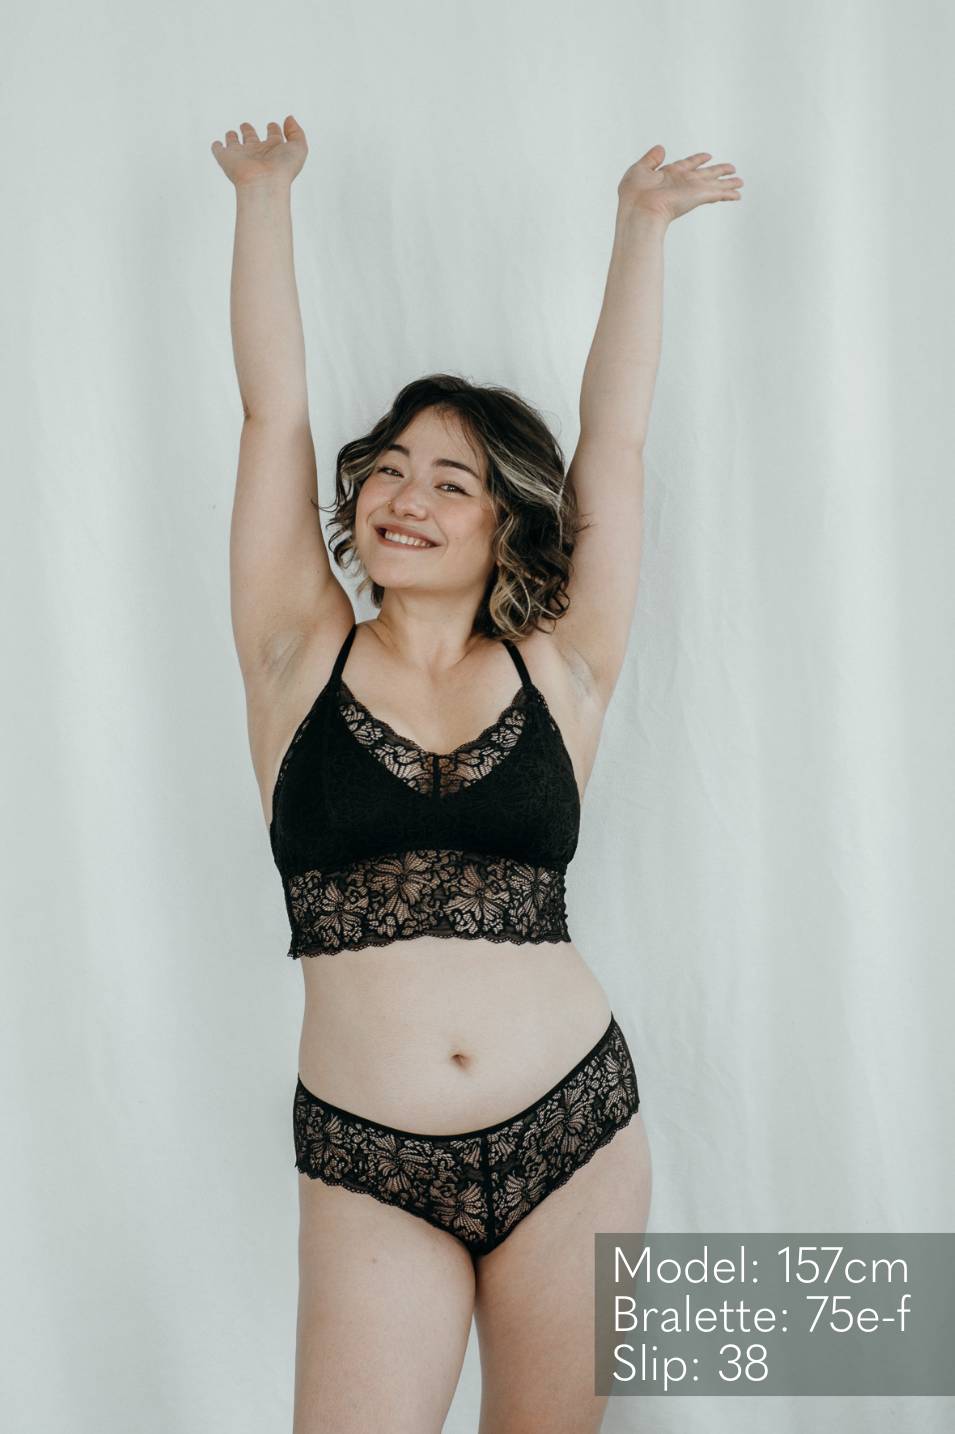 Model in Bralette and slip made of lace stretches her hands in the air.